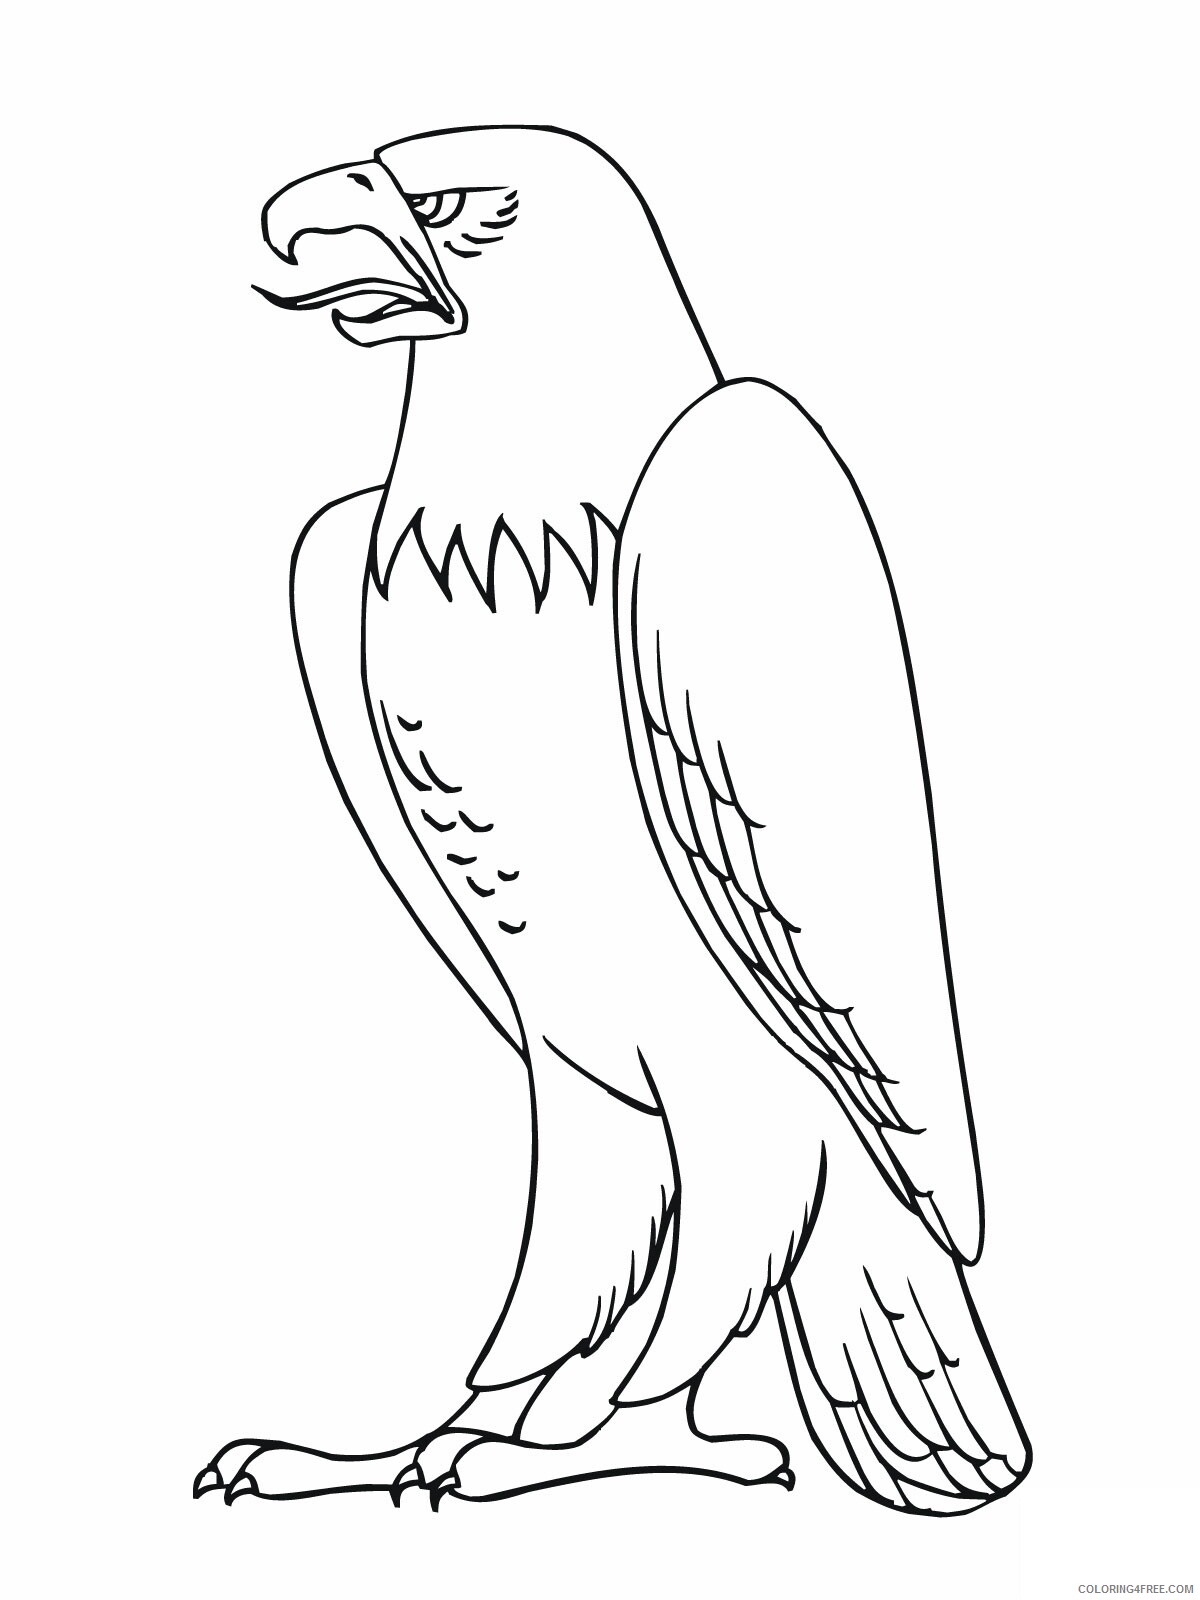 Bald Eagle Coloring Pages Animal Printable Sheets of Bald Eagles 2021 0173 Coloring4free